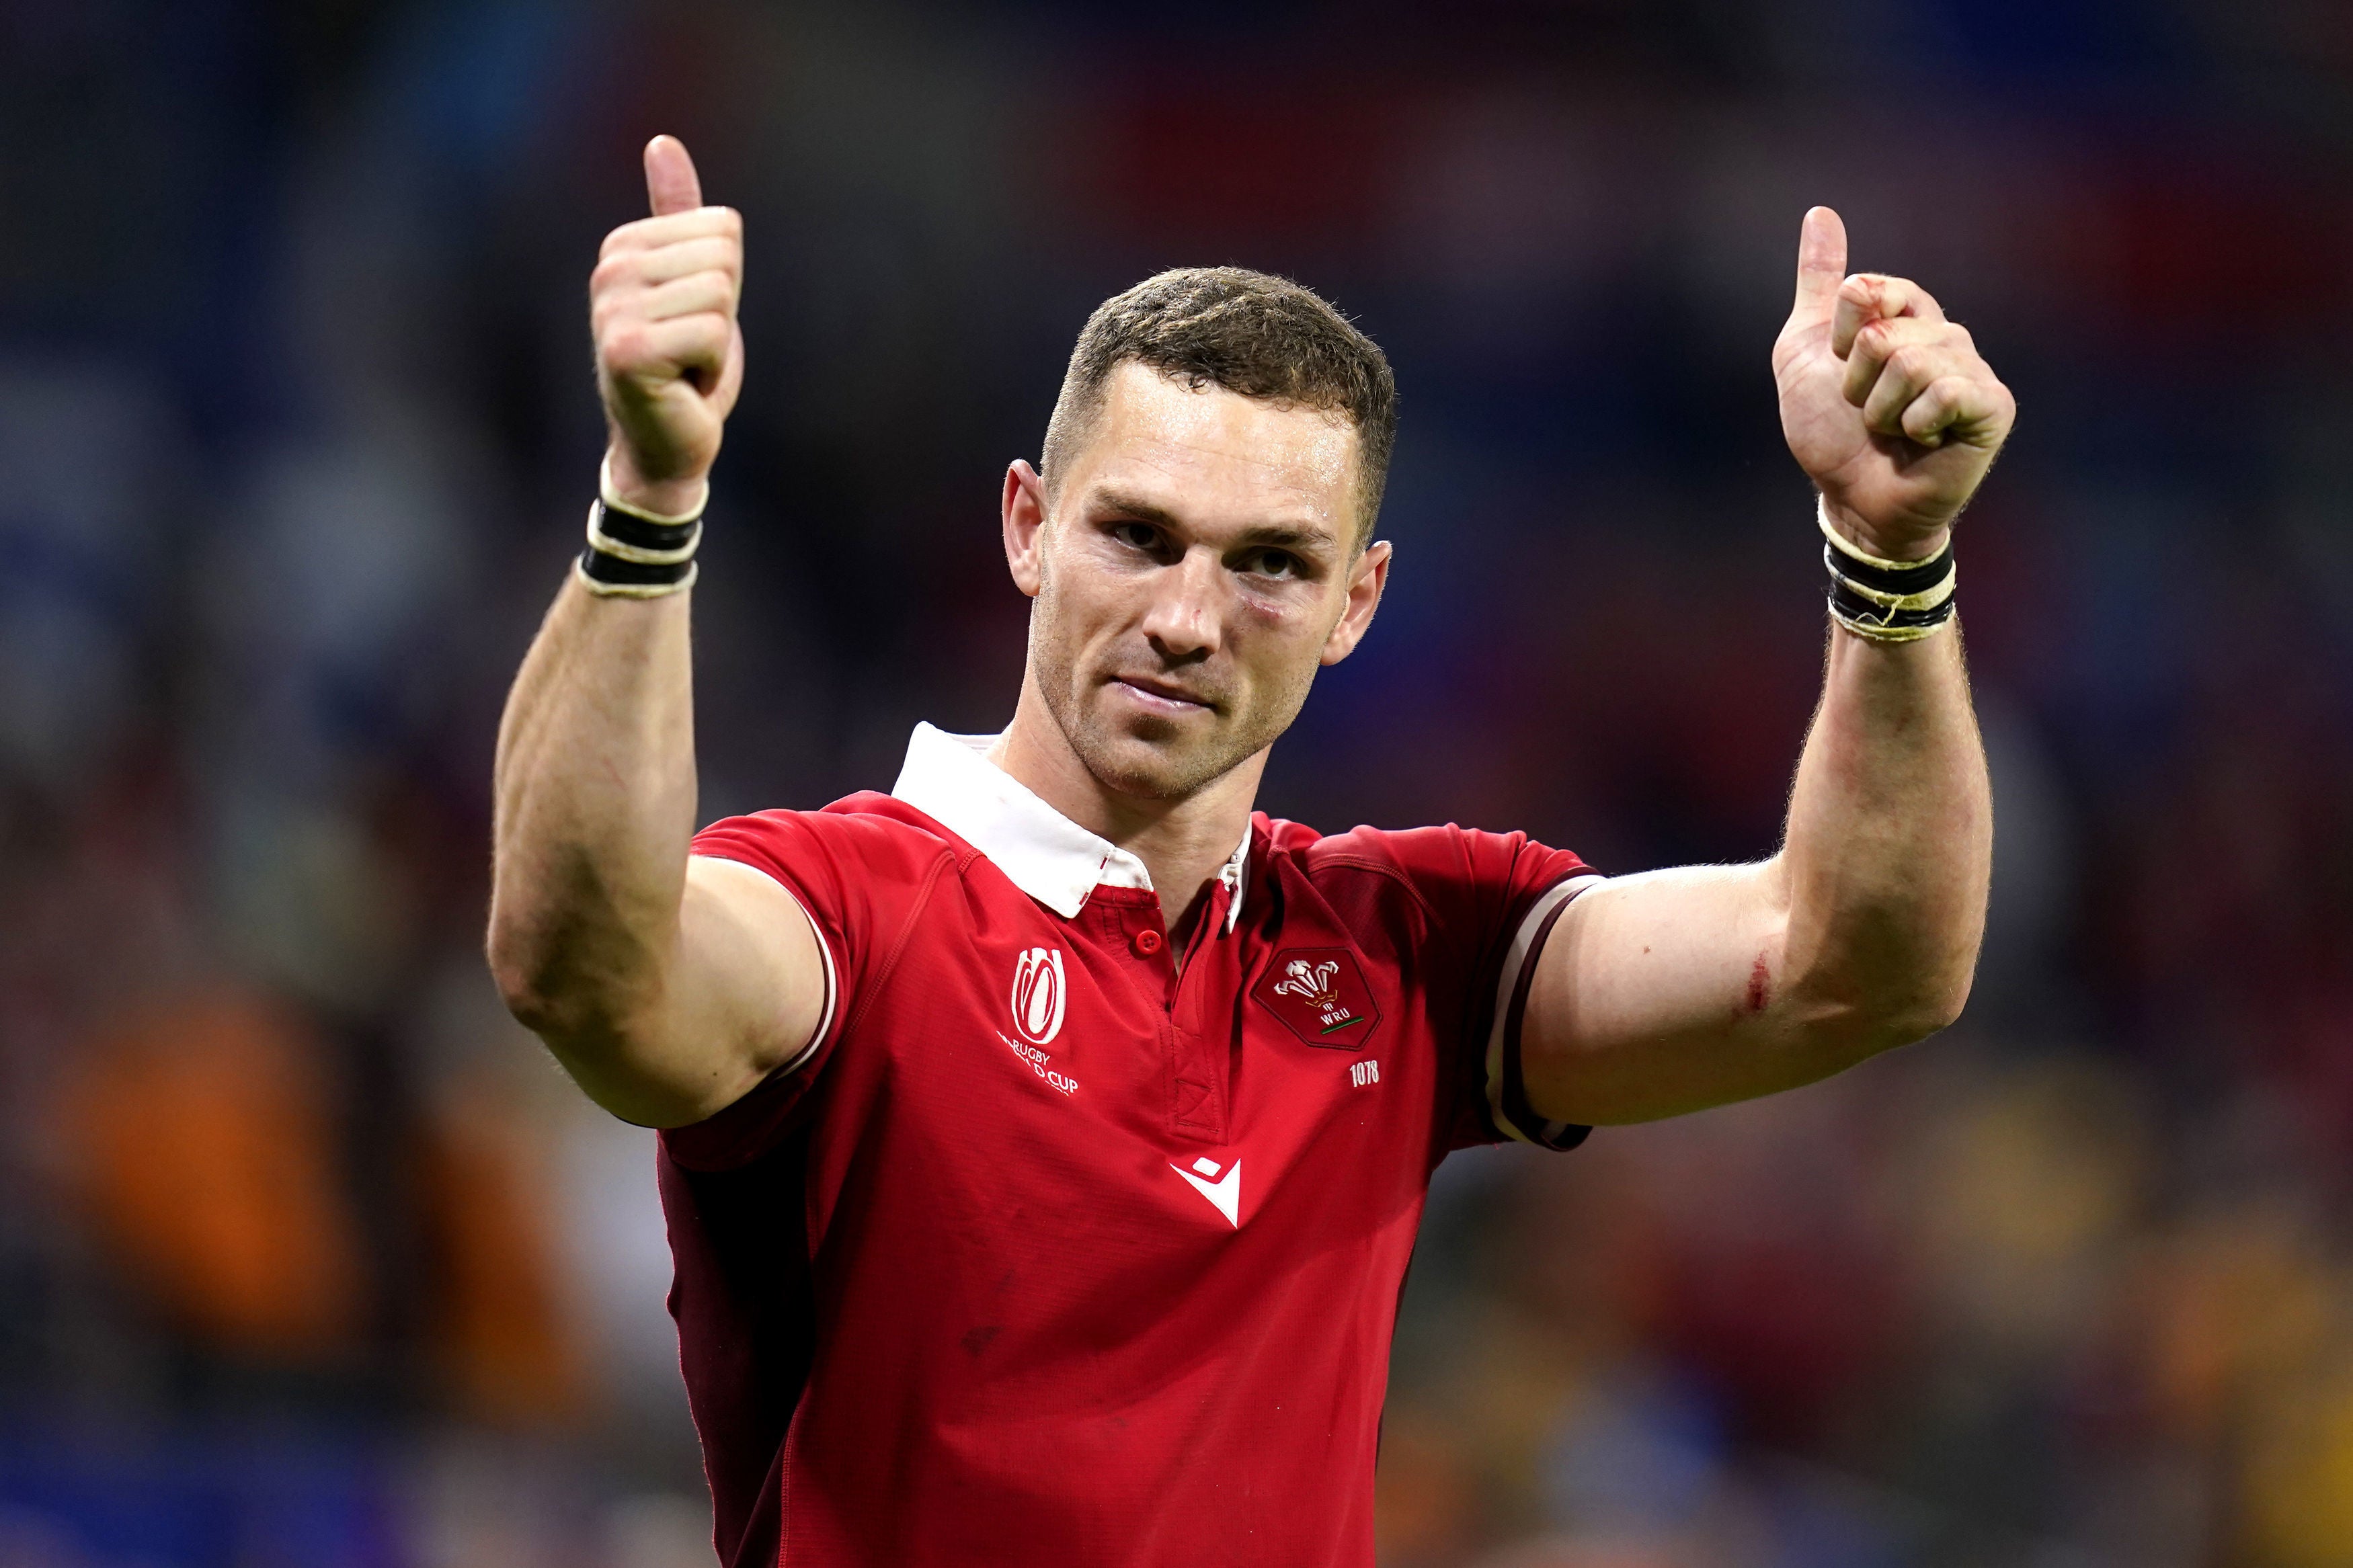 George North’s return is a huge boon for Wales